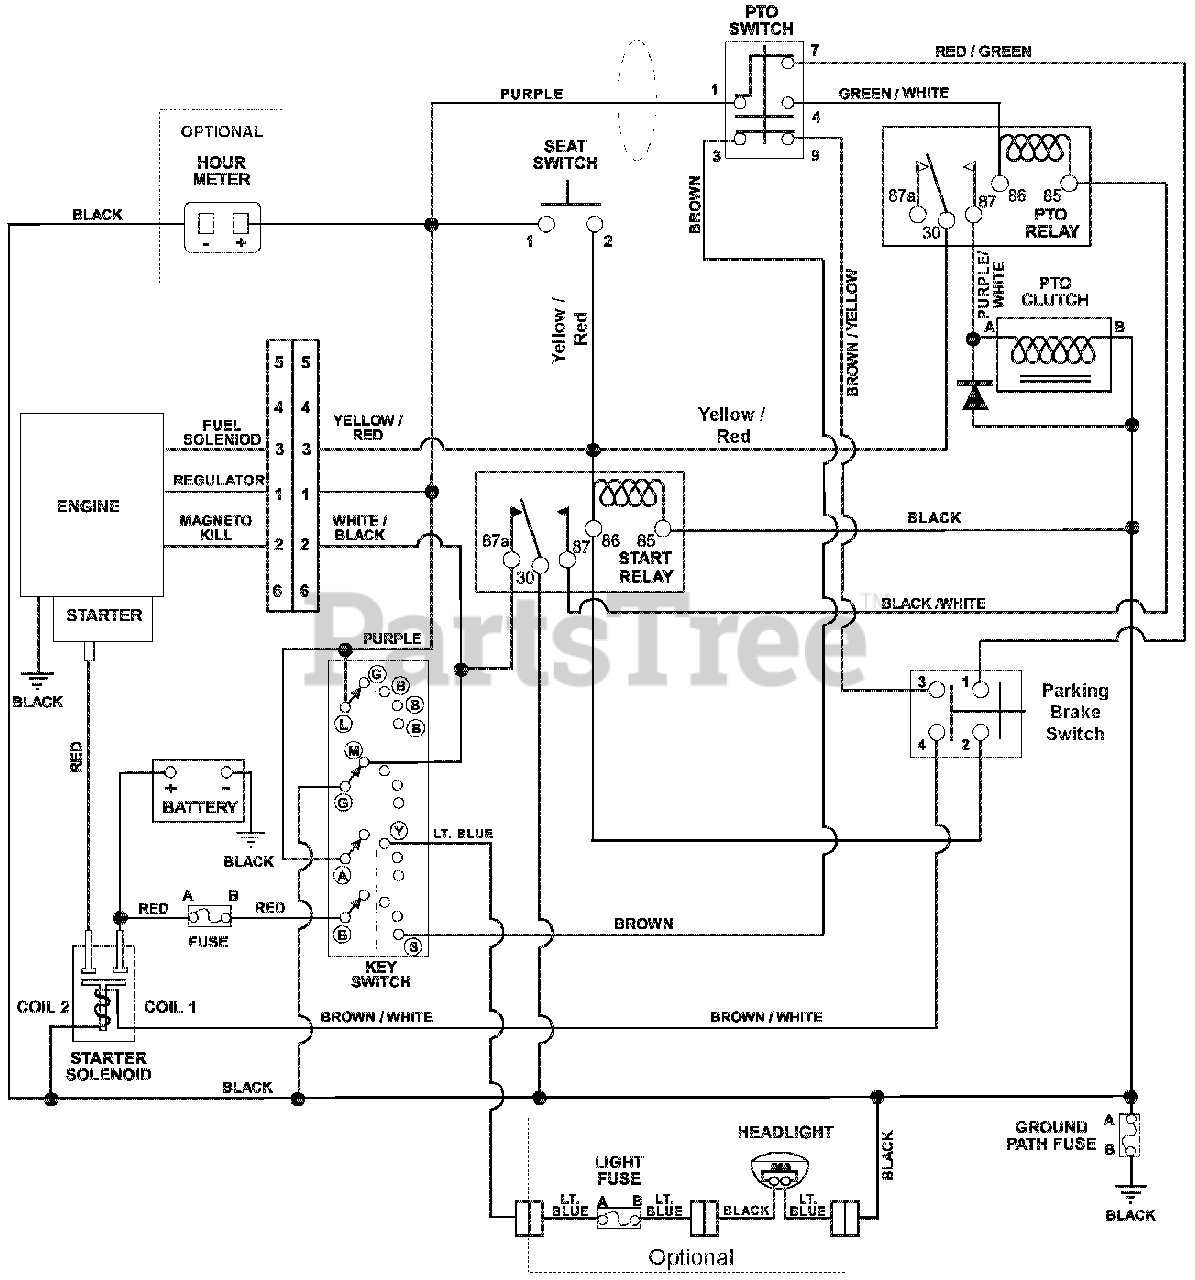 Briggs And Stratton Wiring Diagram 18 Hp from www.partstree.com